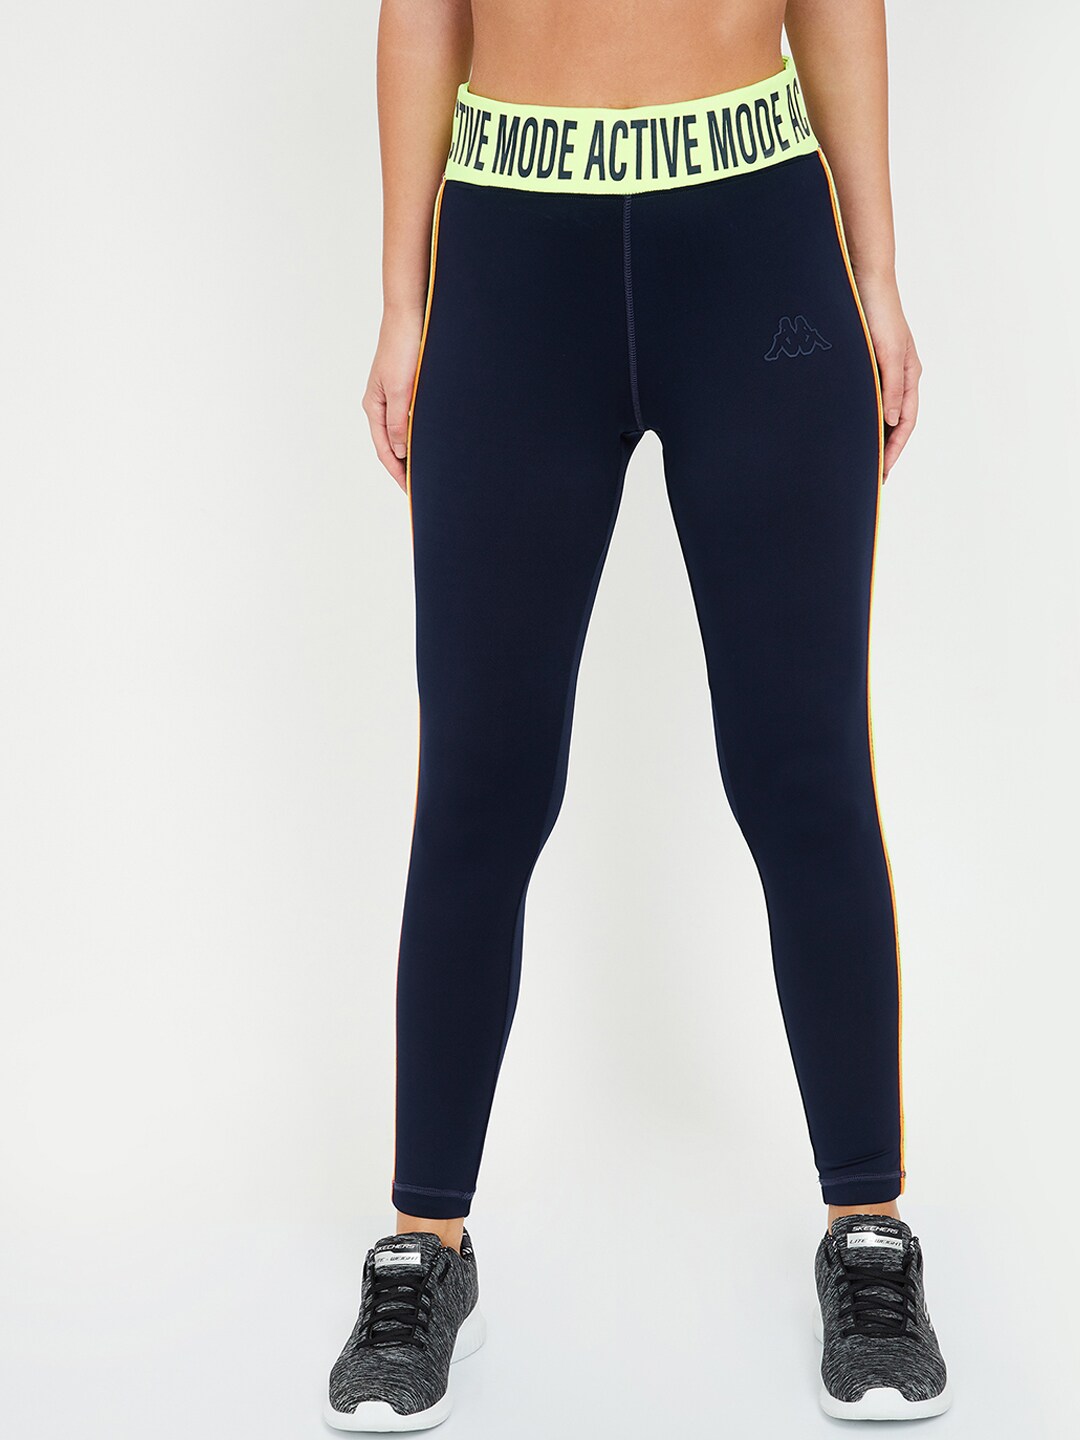 Kappa Women Navy Blue Solid Tights Price in India